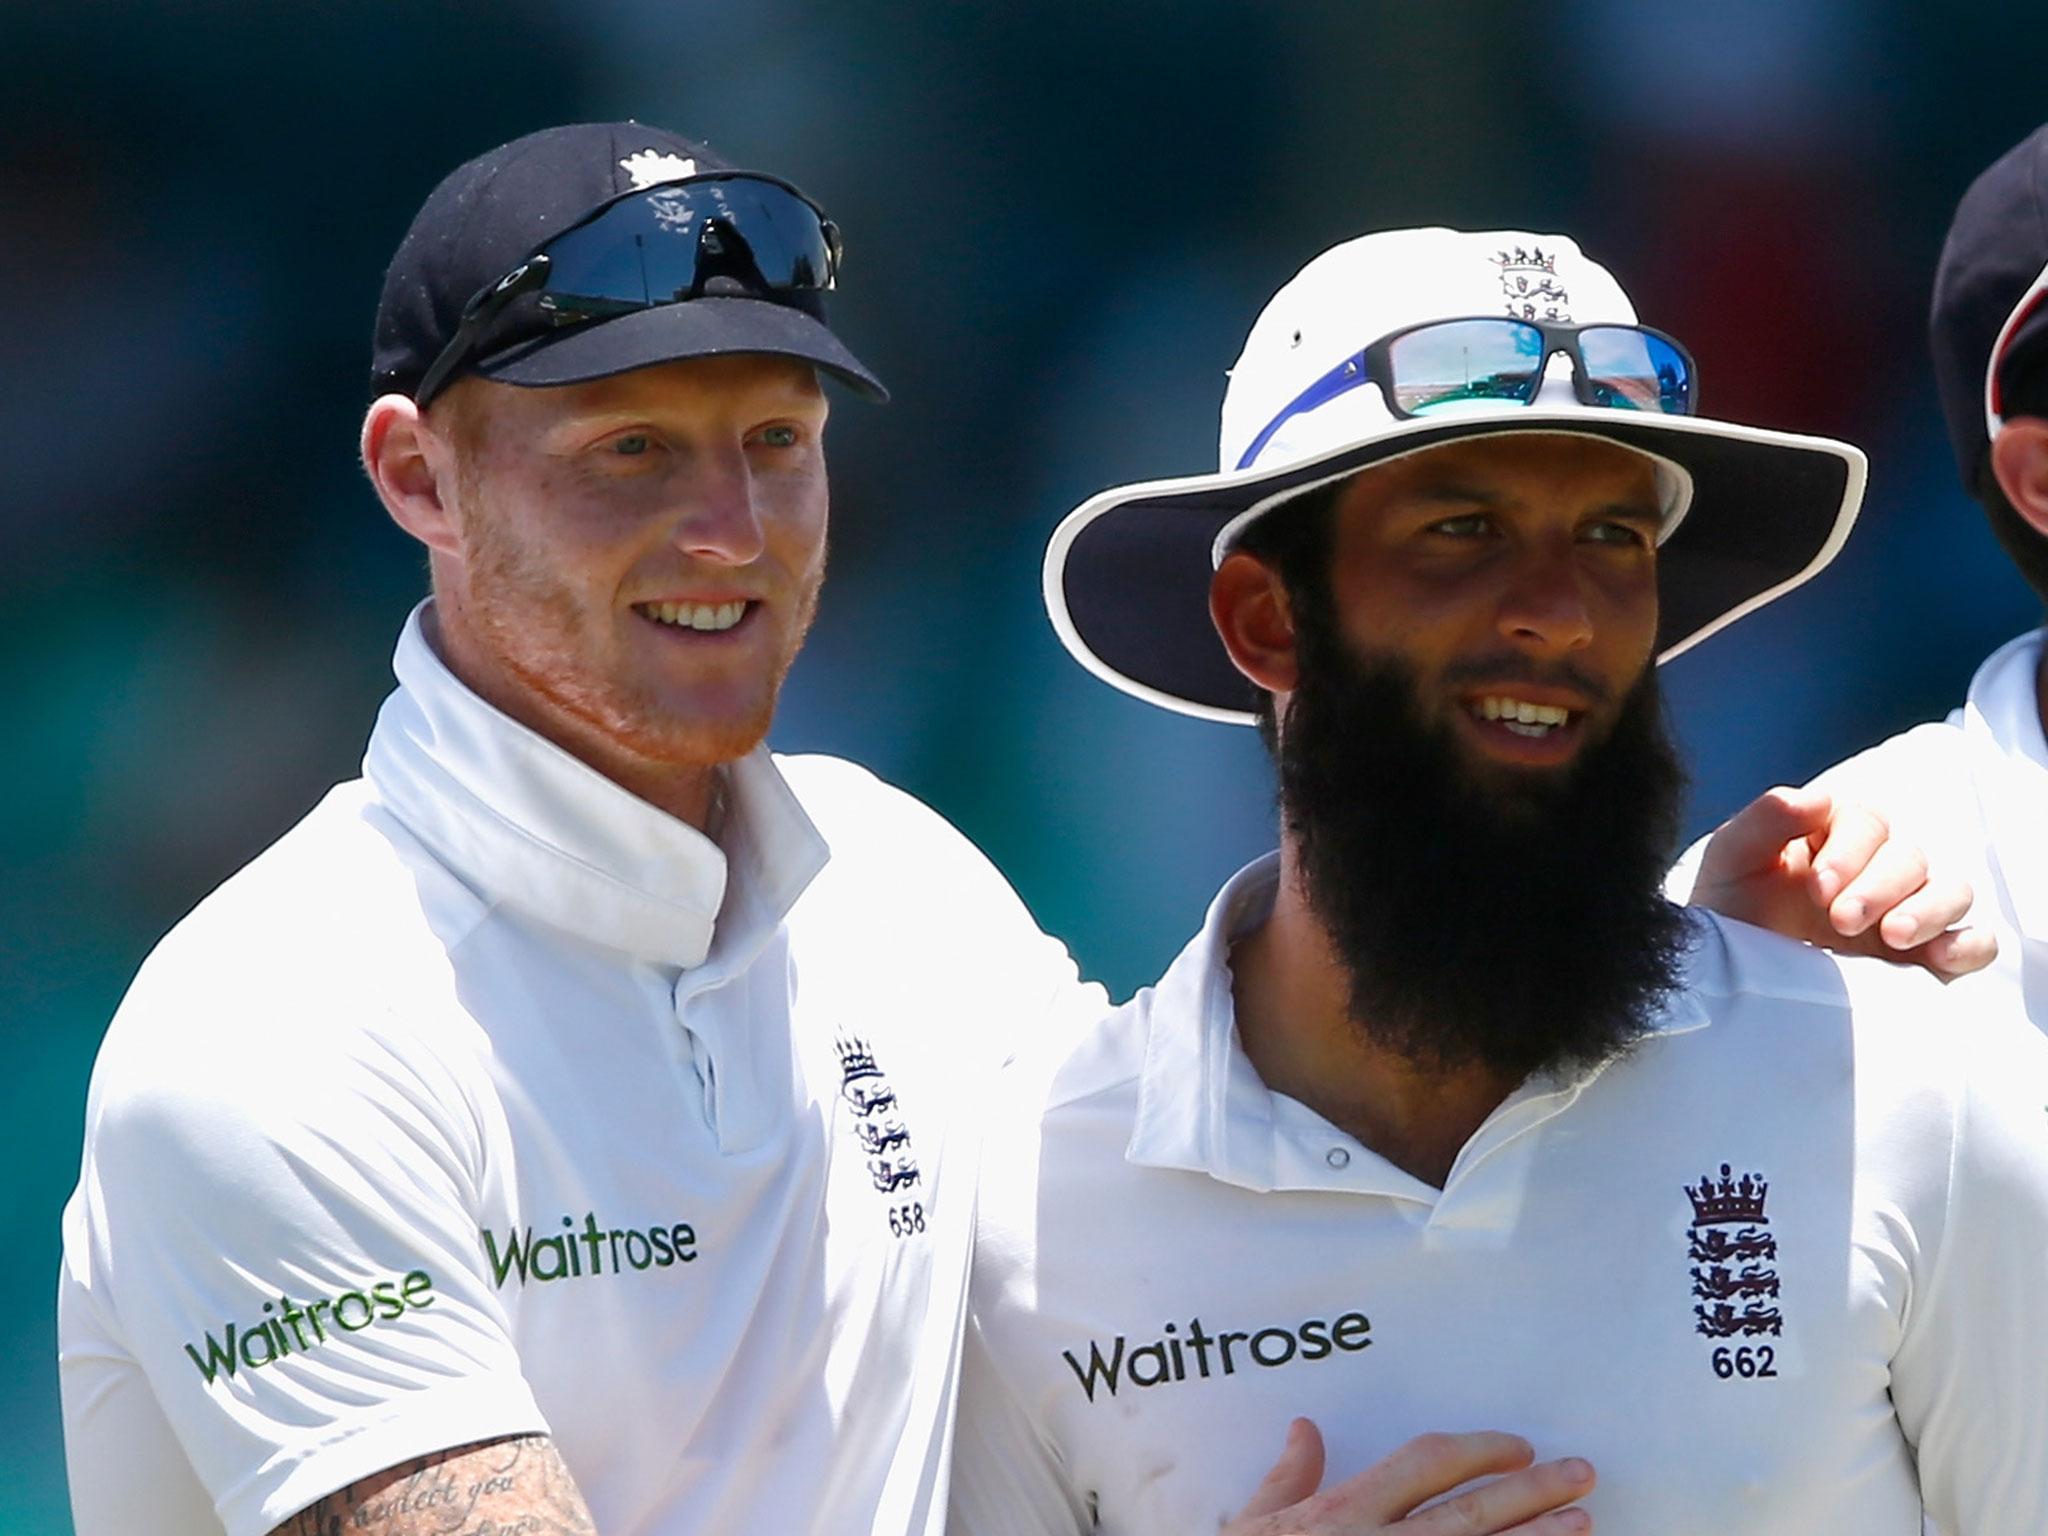 Ben Stokes and Moeen Ali have grown into one of the most dangerous duos in world cricket